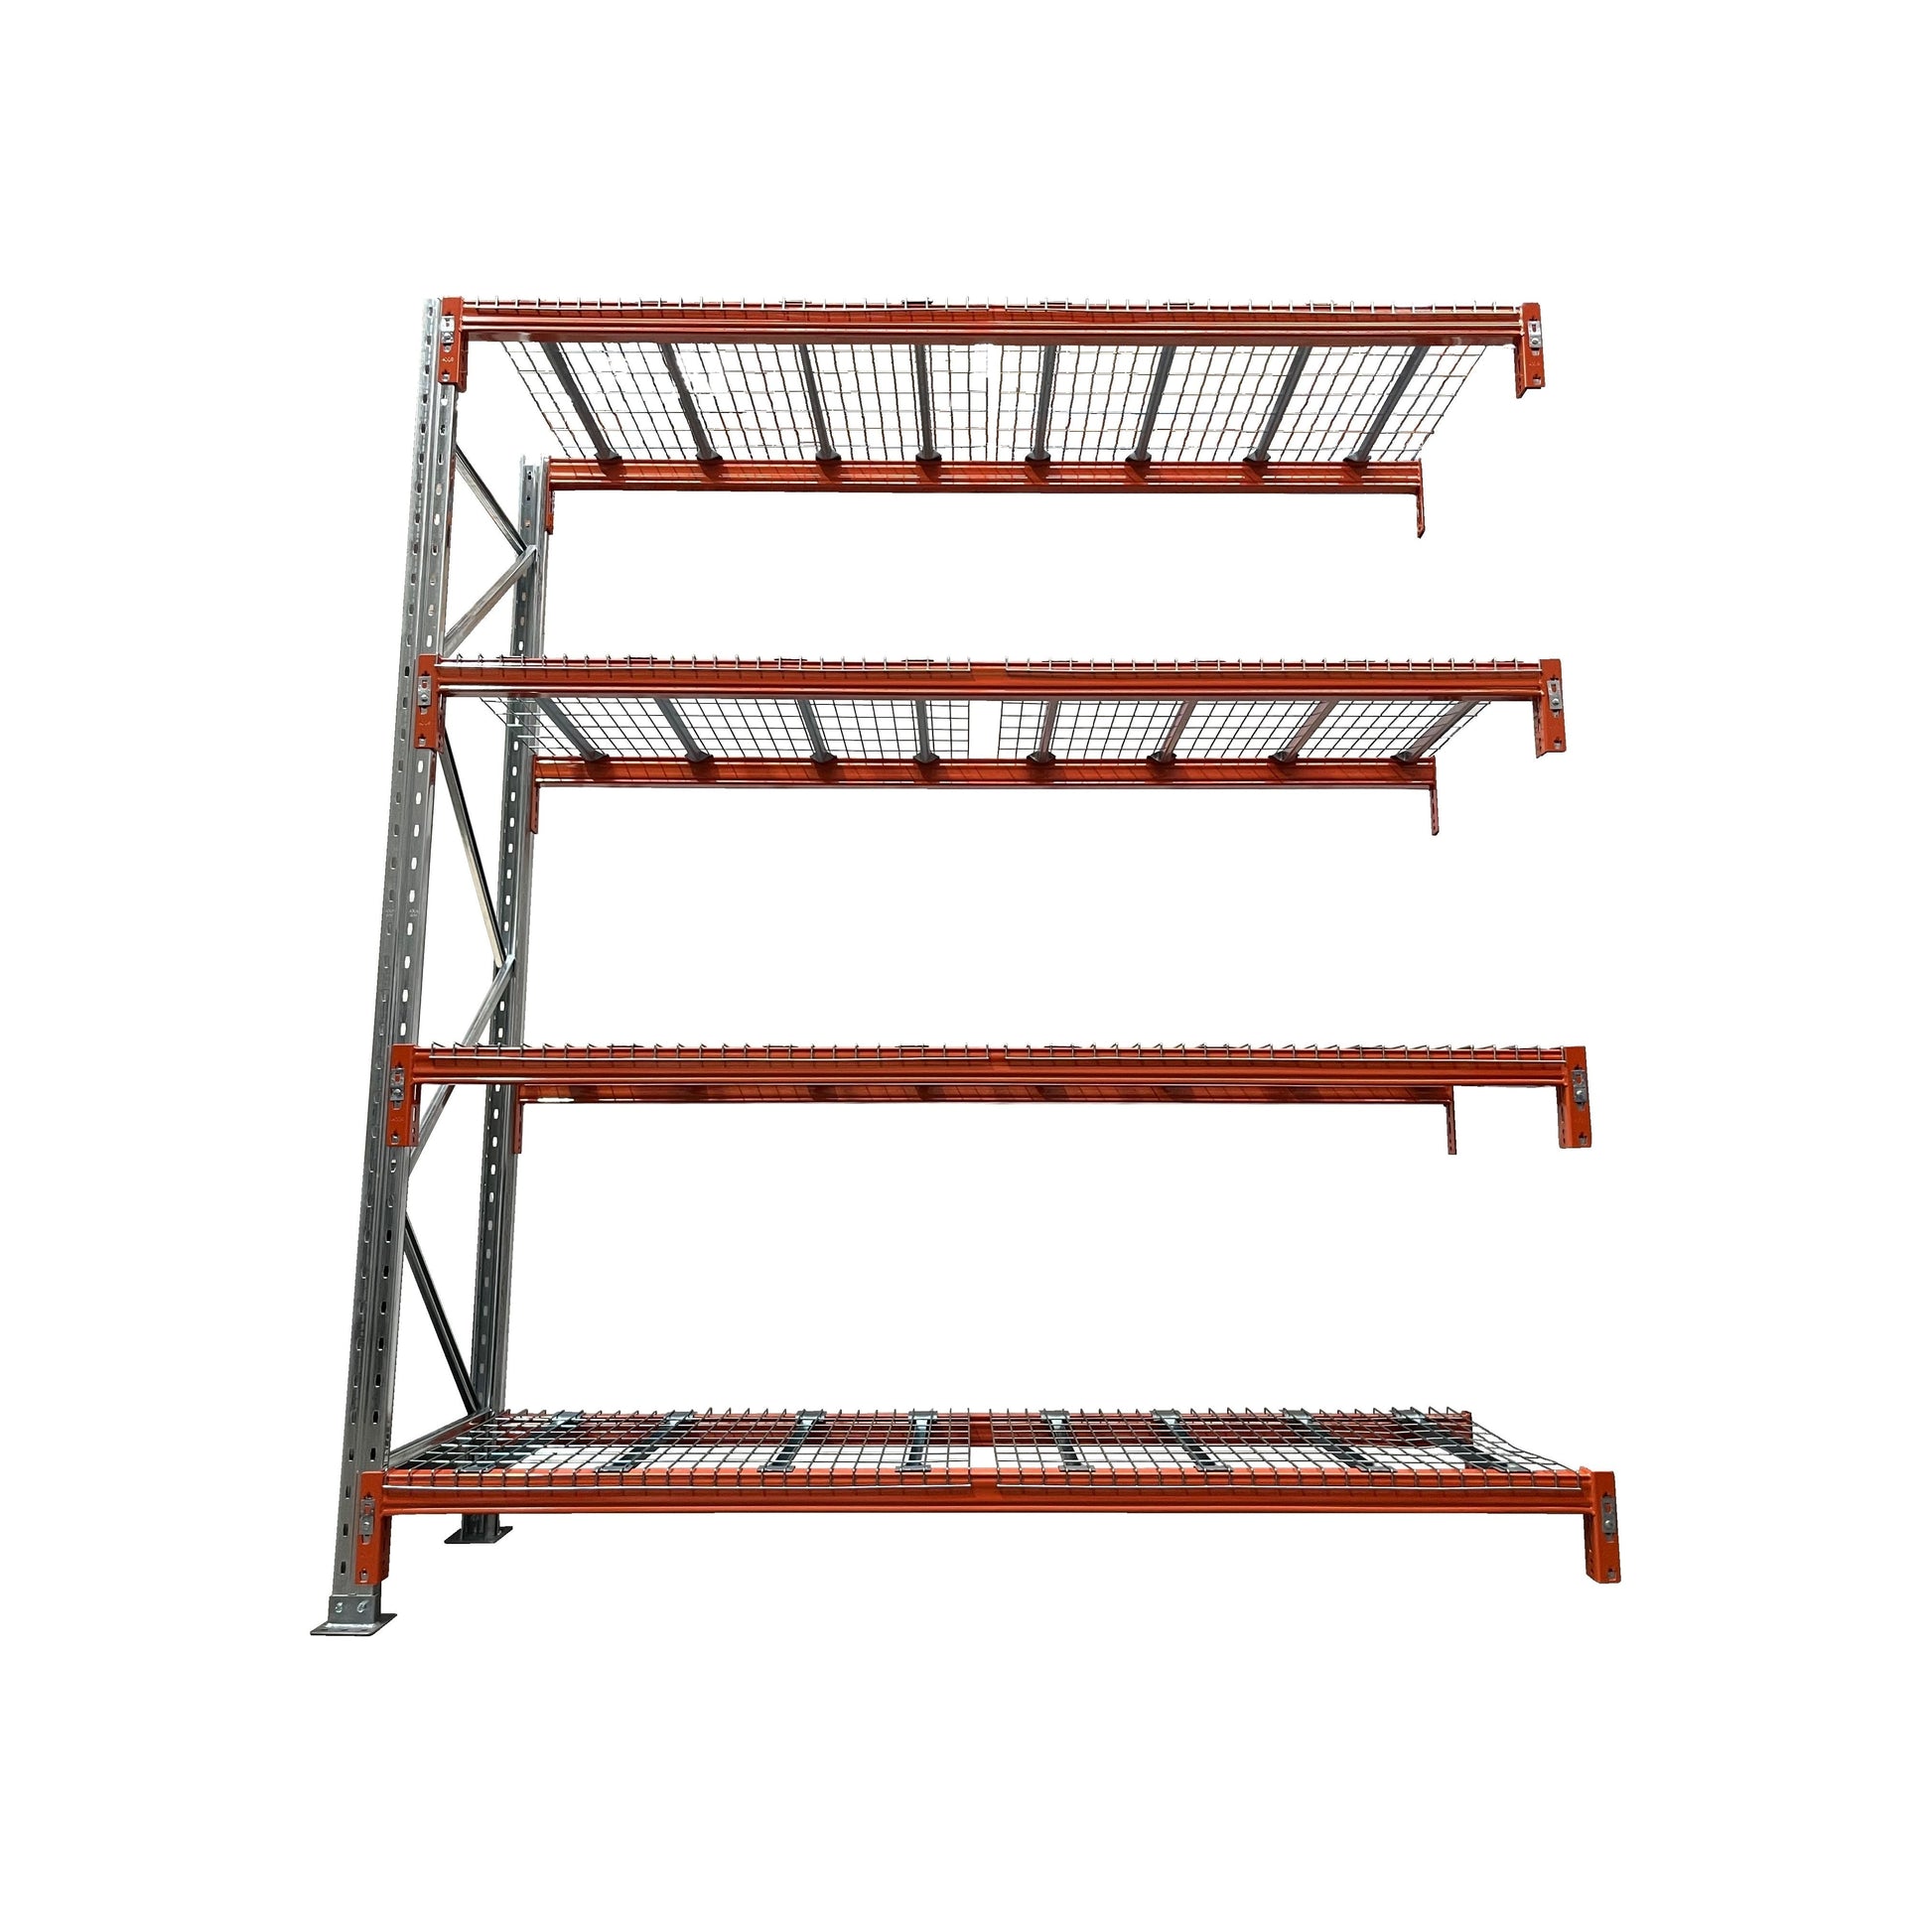 ReadyRack  Pallet Racking Add On Bay 3658mm High with Mesh